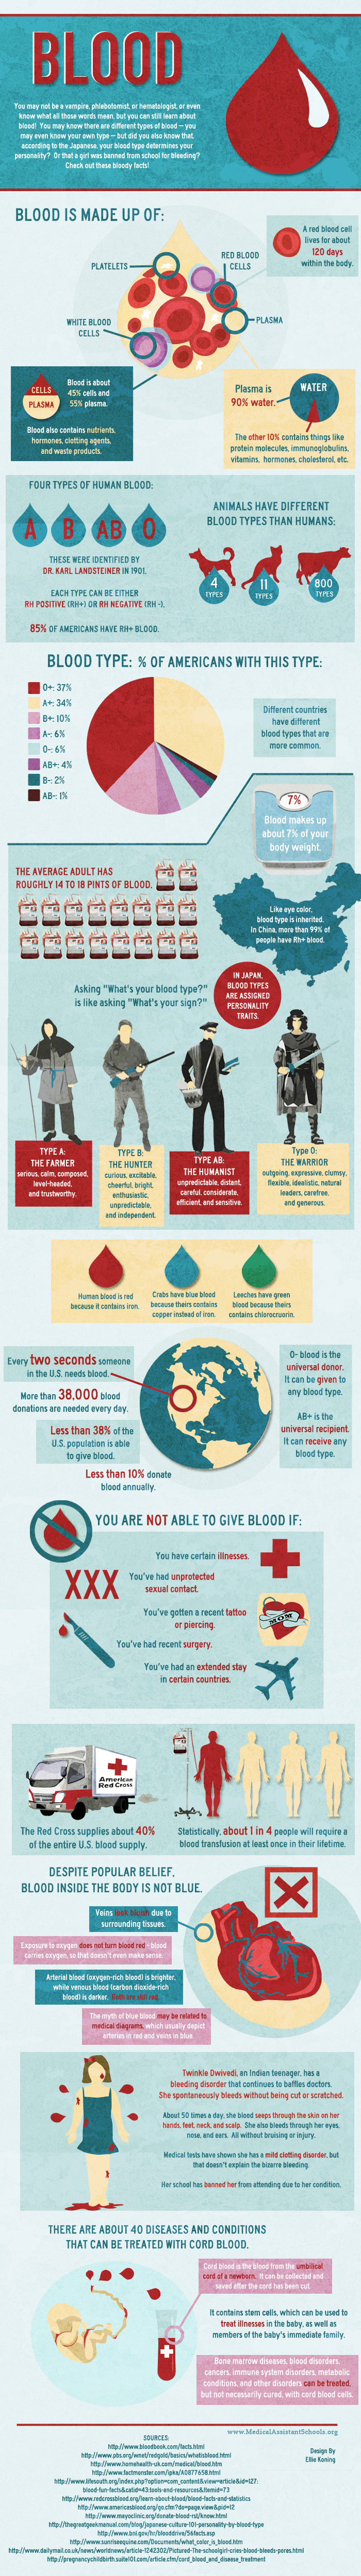 Facts About Blood